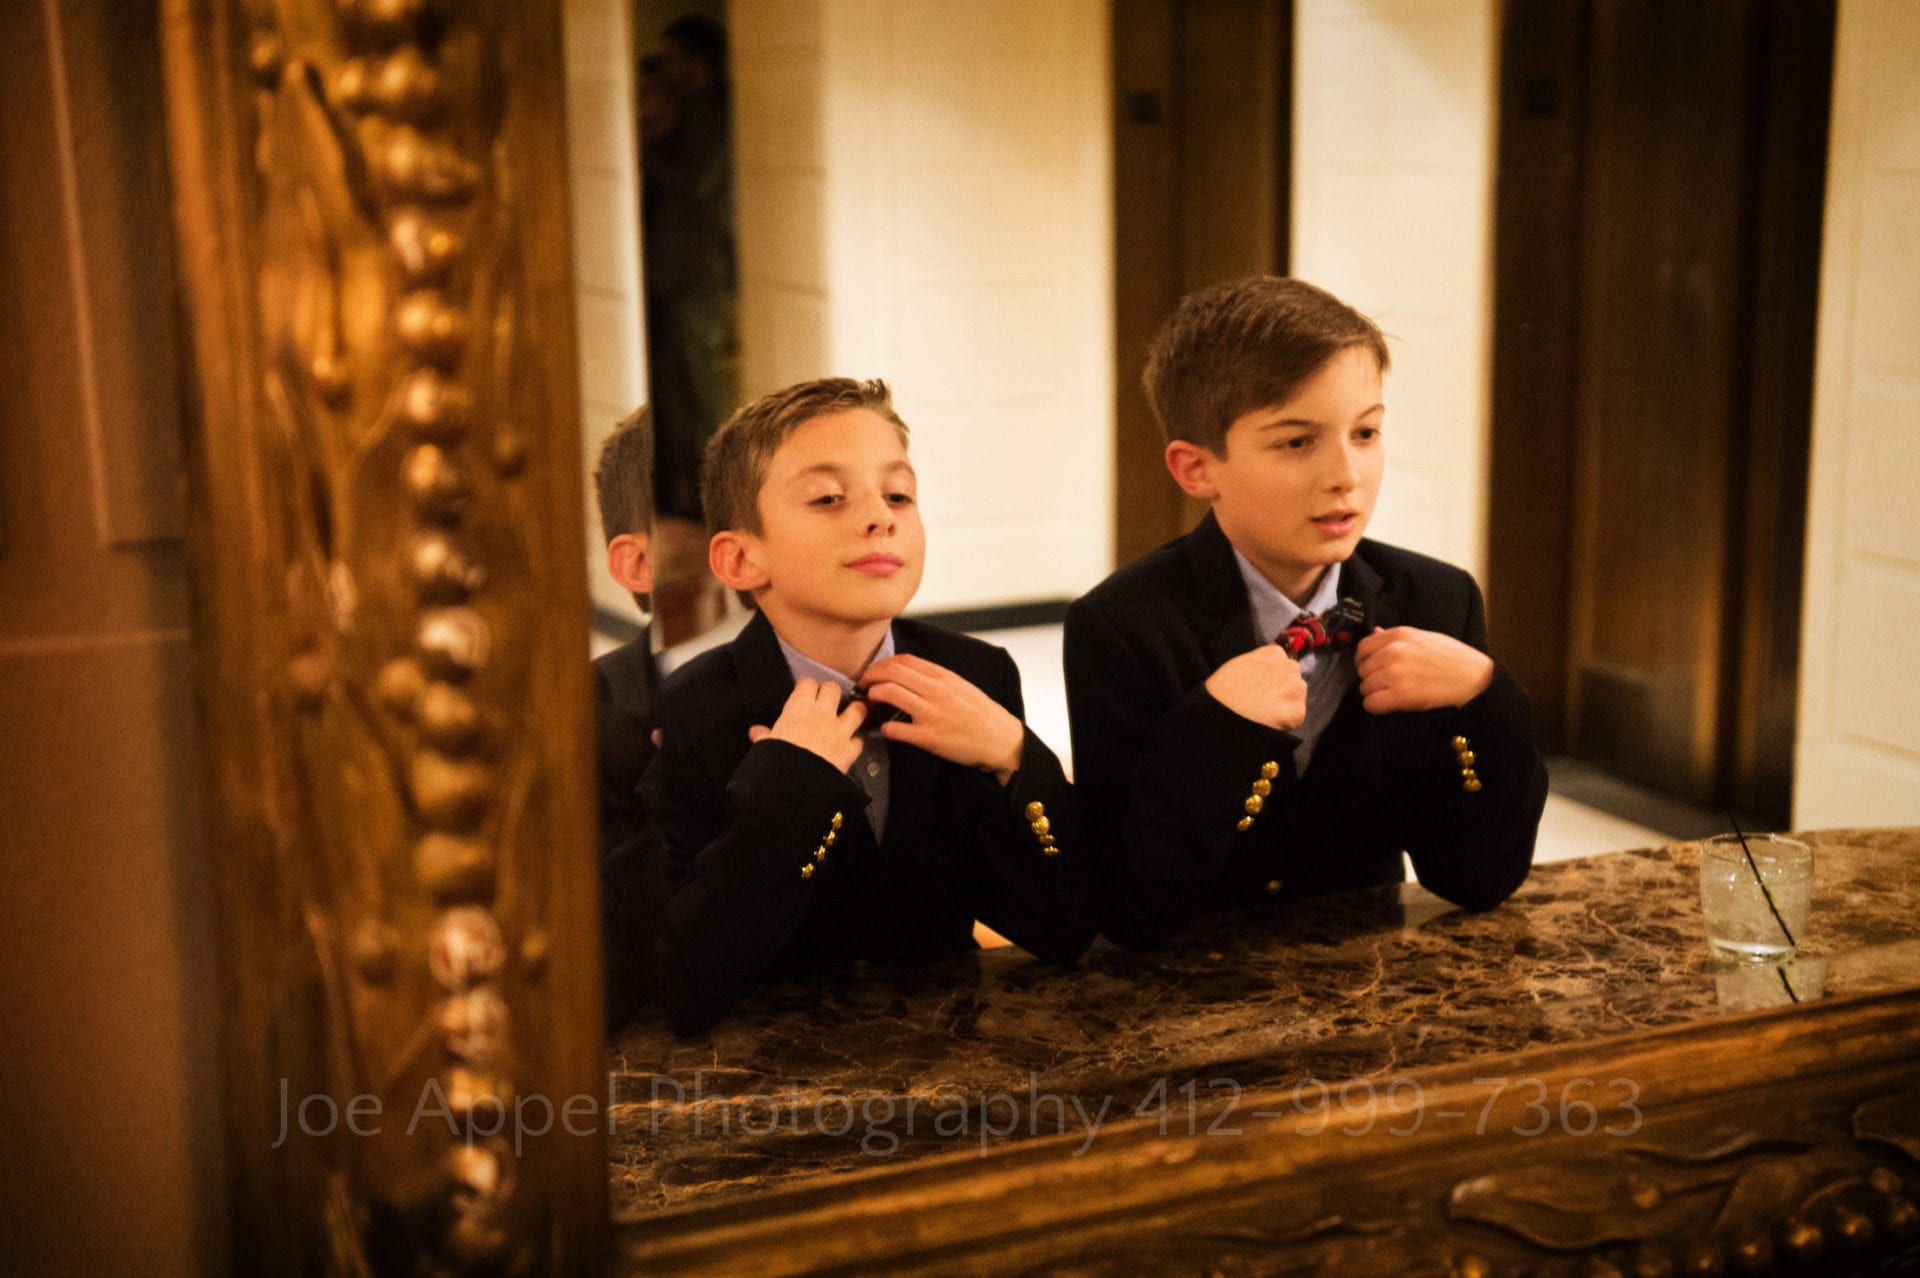 two little boys adjust their bowties in a mirror